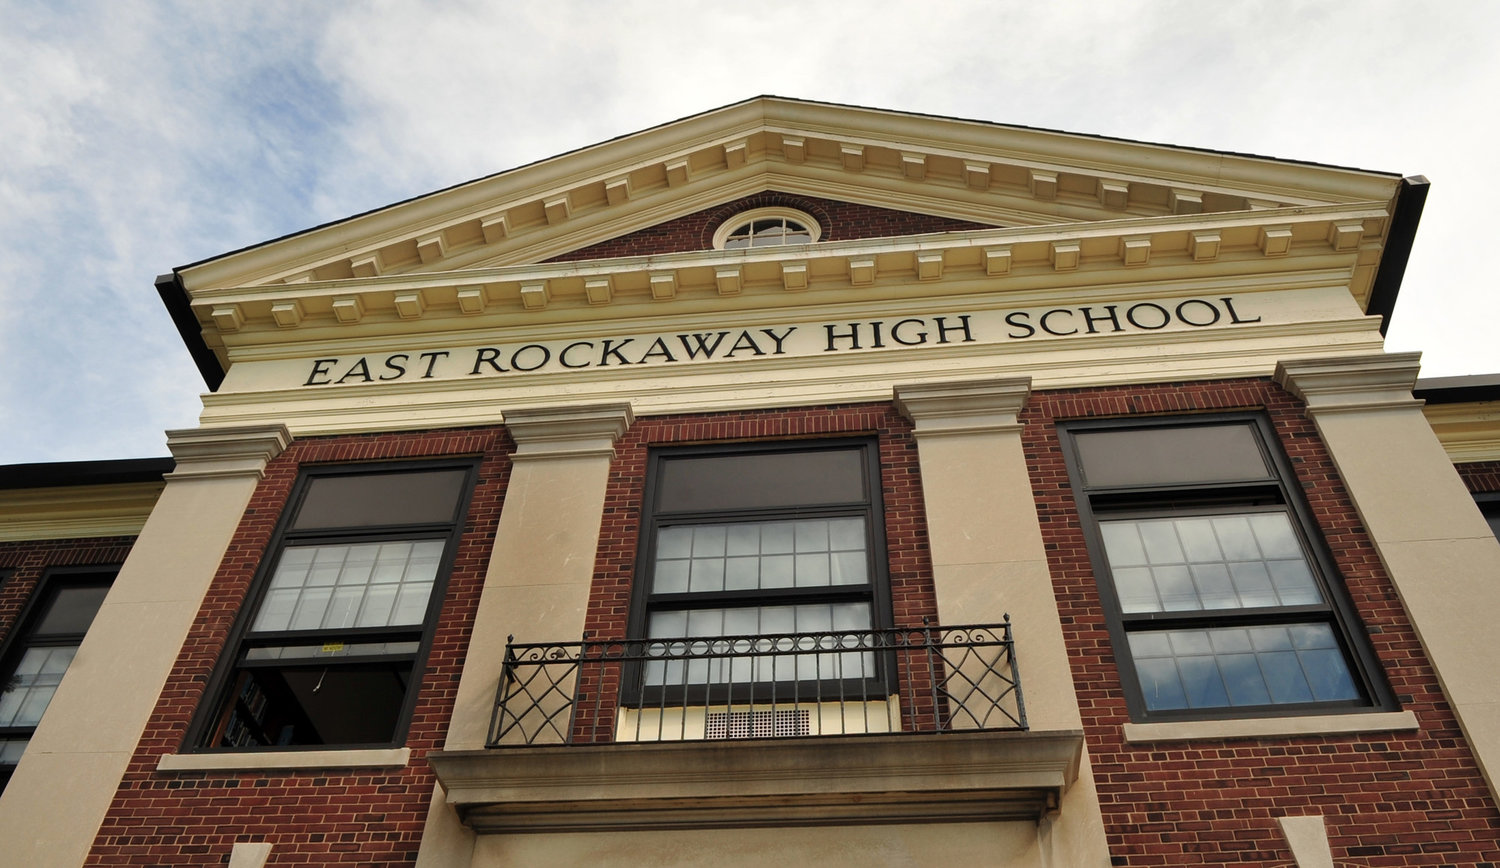 East Rockaway voters approved the district's $40.2 million budget for the 2019-20 school year.